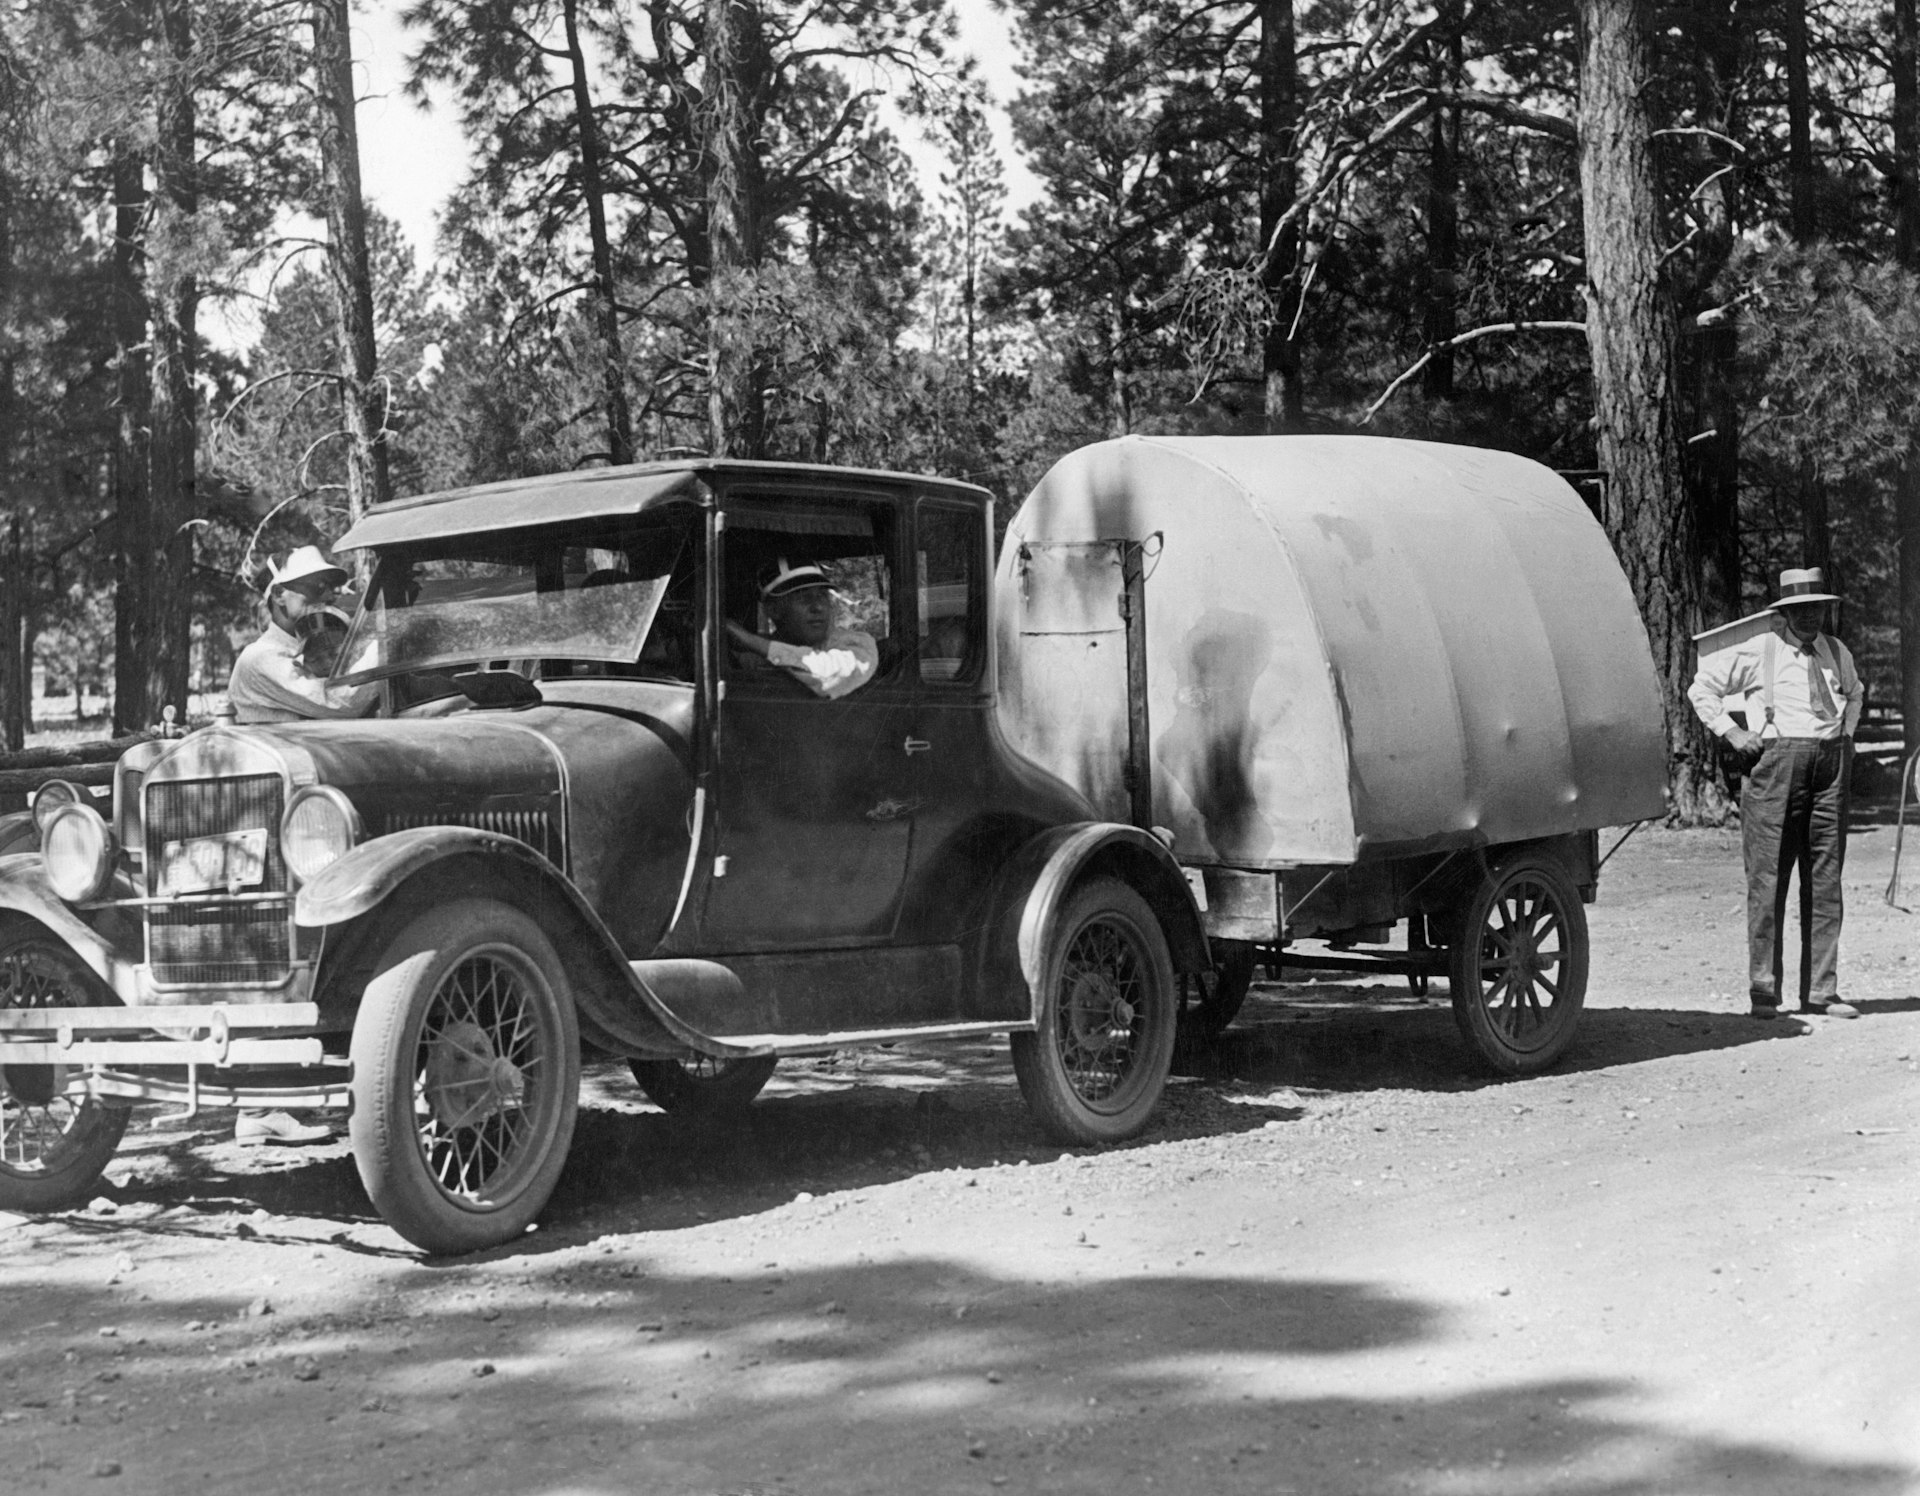 A car pulls an early caravan with tent construction in the Kaibab National Forest on the northern edge of the Grand Canyon.